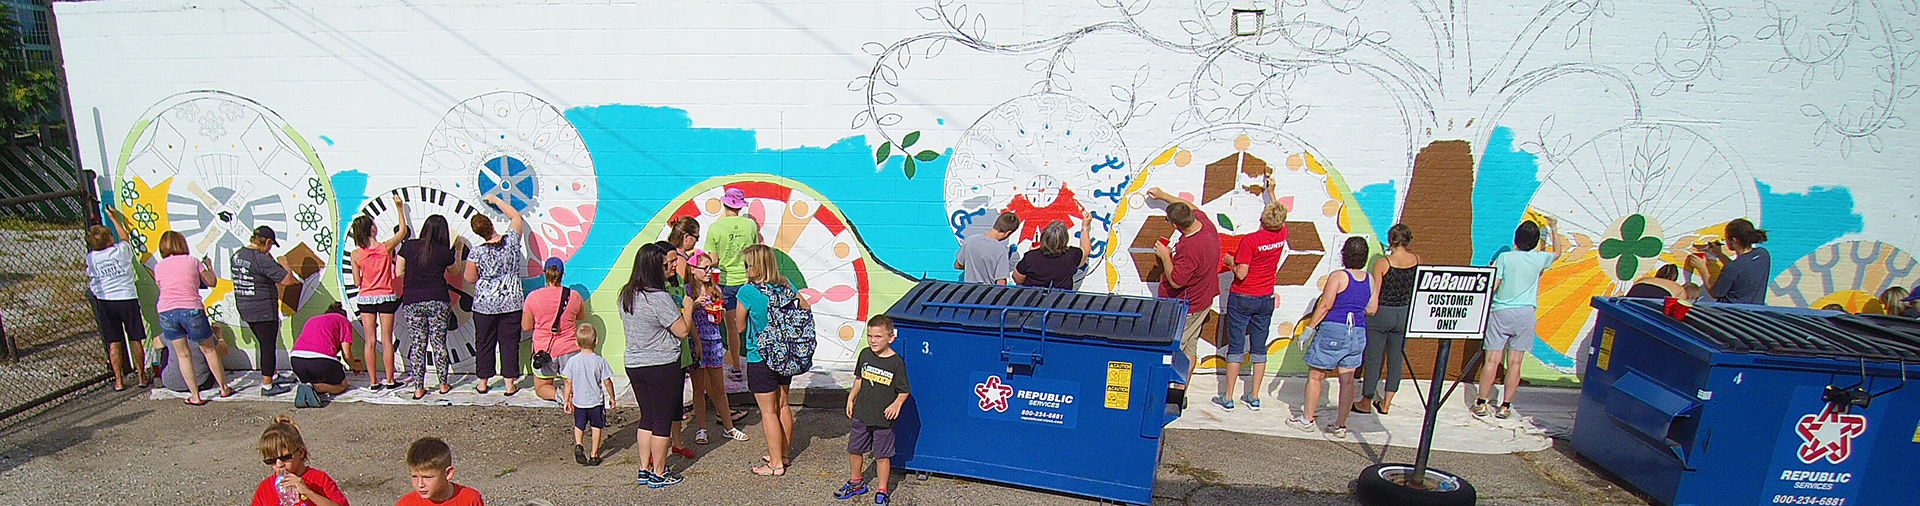 Color the County Mural Program 2016 Greenwood